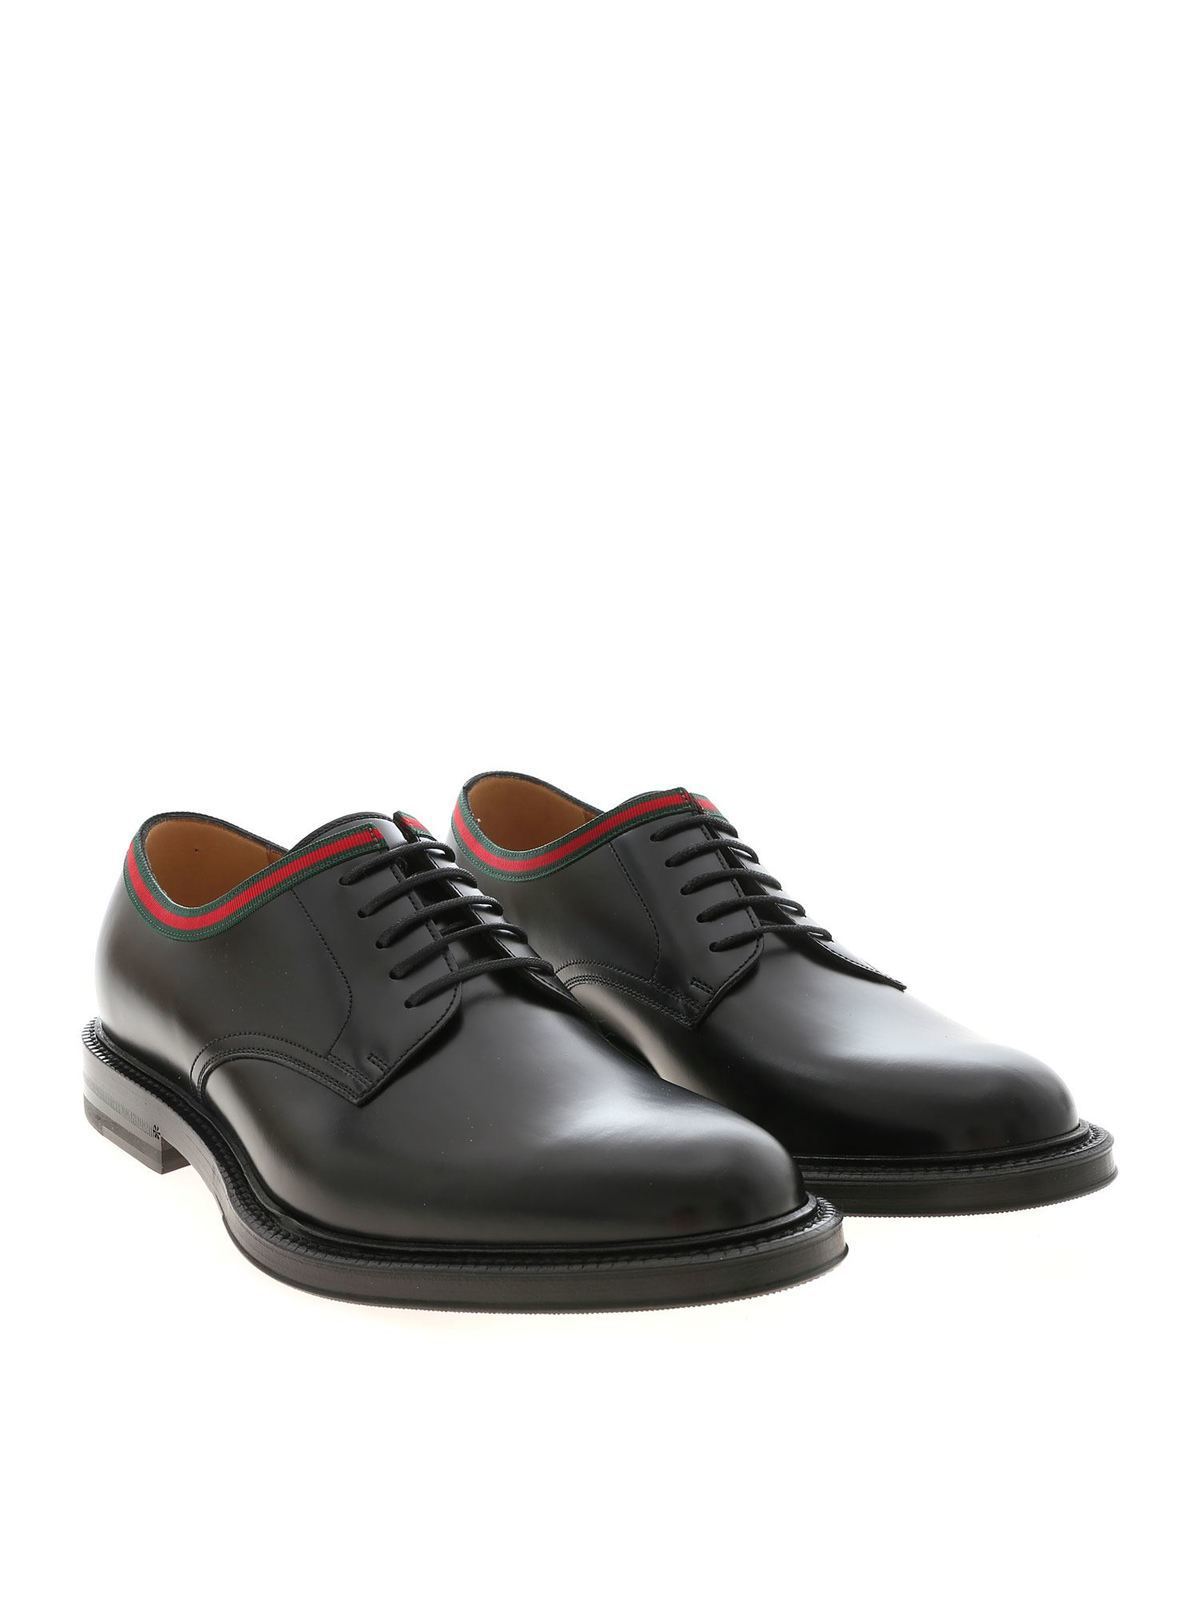 Gucci - Web derby shoes in black 